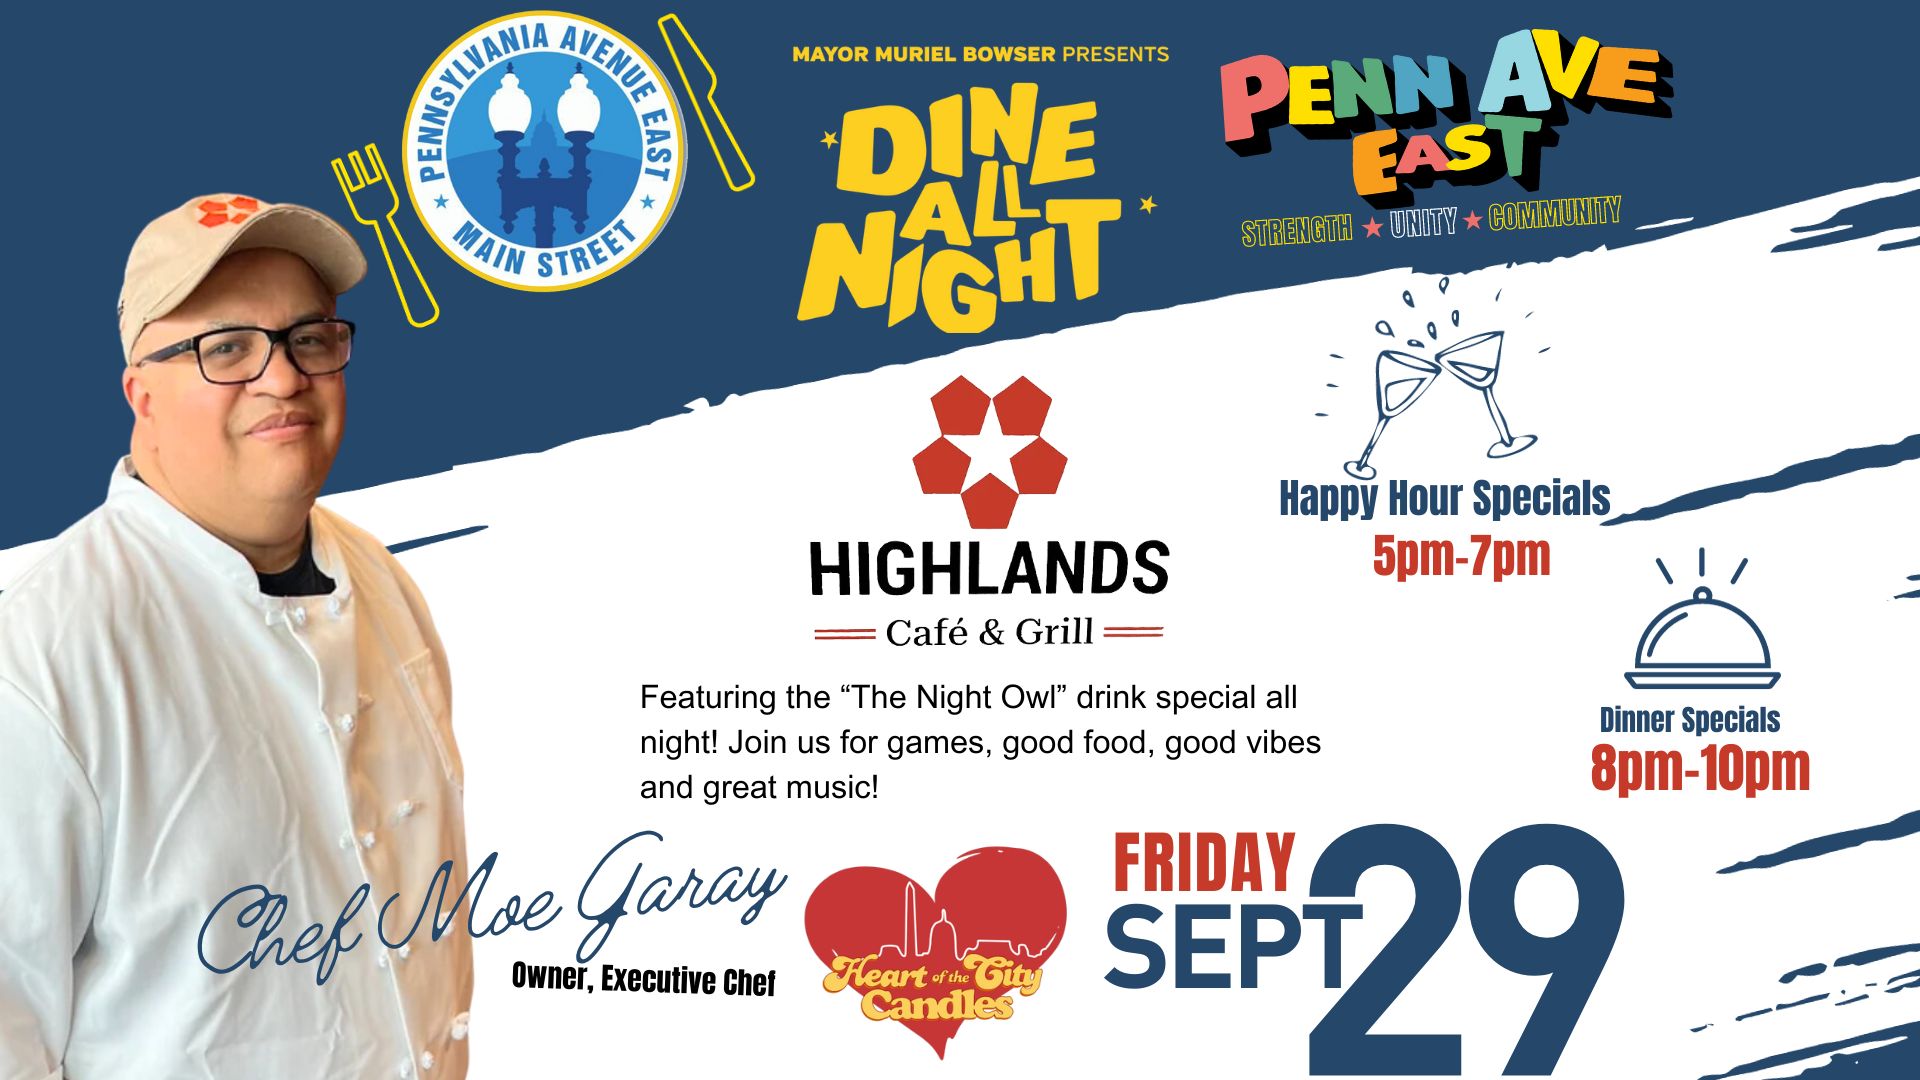 PAEMS presents Dine All Night @HIghlands Cafe and Grill on Friday Sept 29th